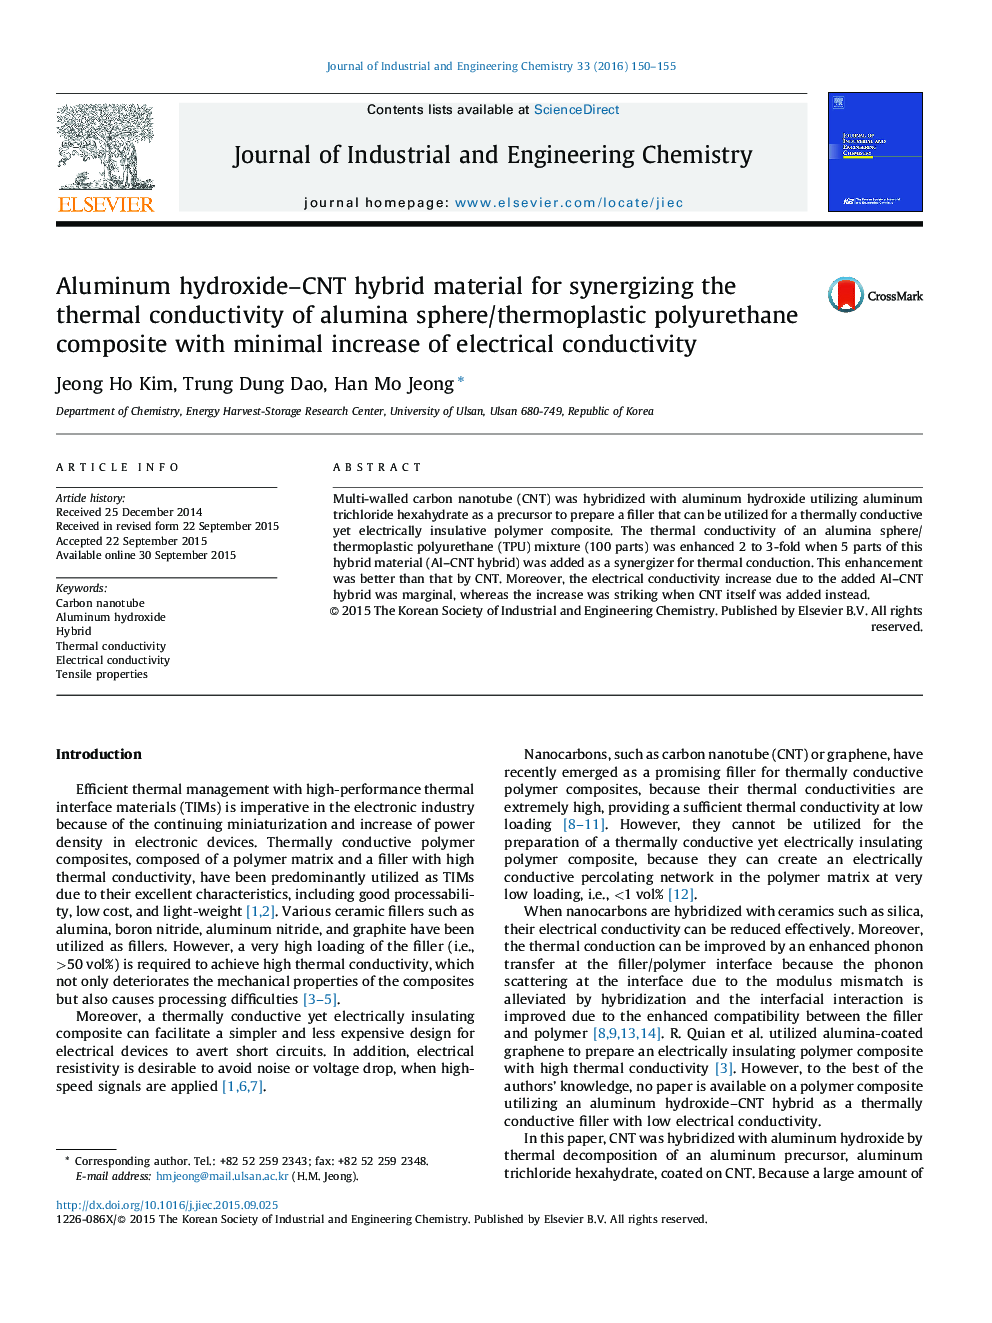 Aluminum hydroxide–CNT hybrid material for synergizing the thermal conductivity of alumina sphere/thermoplastic polyurethane composite with minimal increase of electrical conductivity